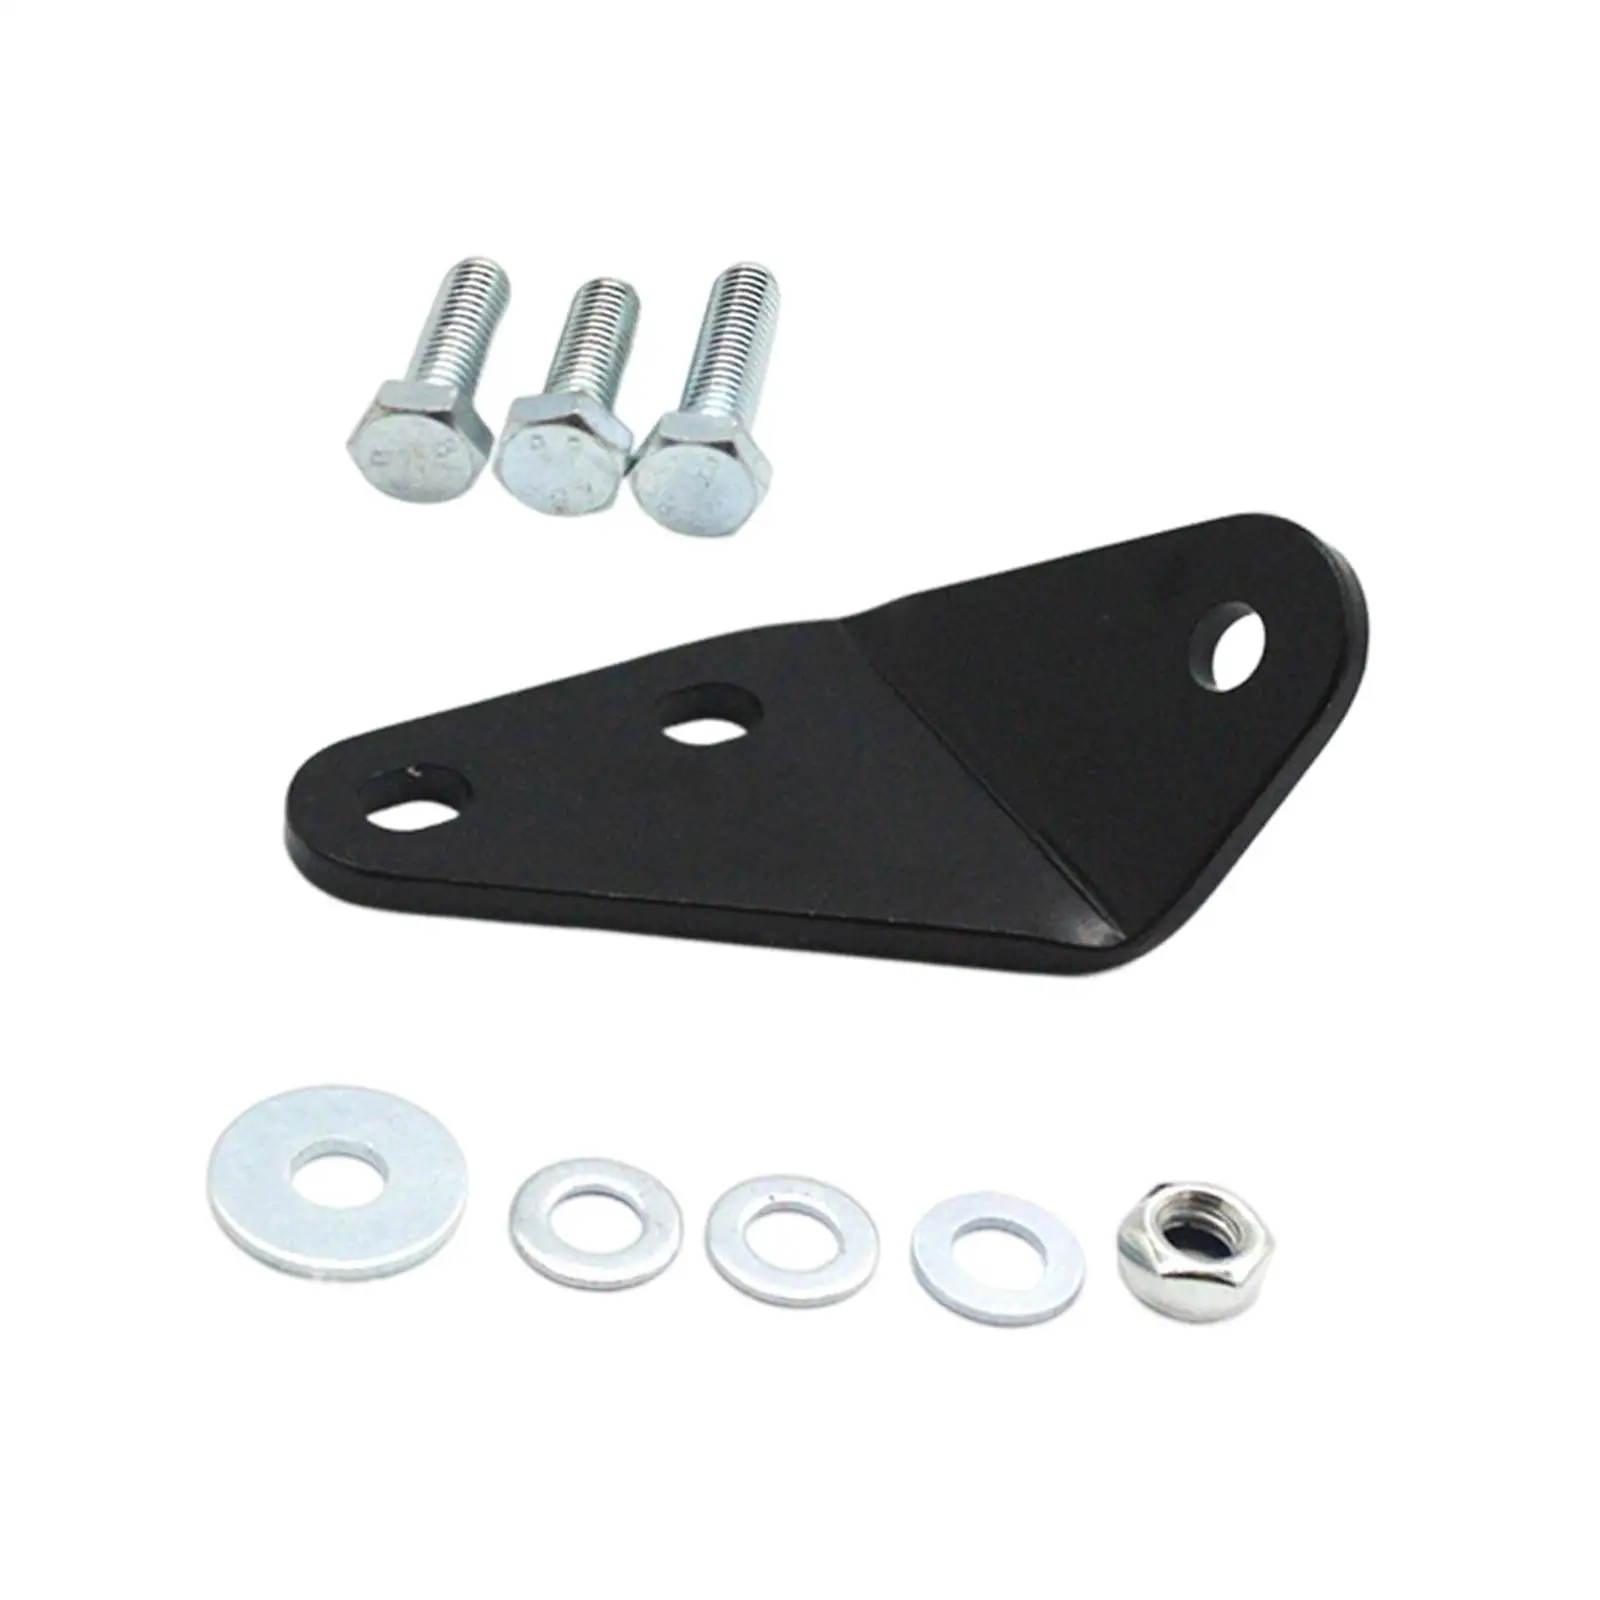 Clutch Pedal Repair Bracket High Quality High Performance Replace Parts for VW T4 Transporter Multivan Caravelle Accessory